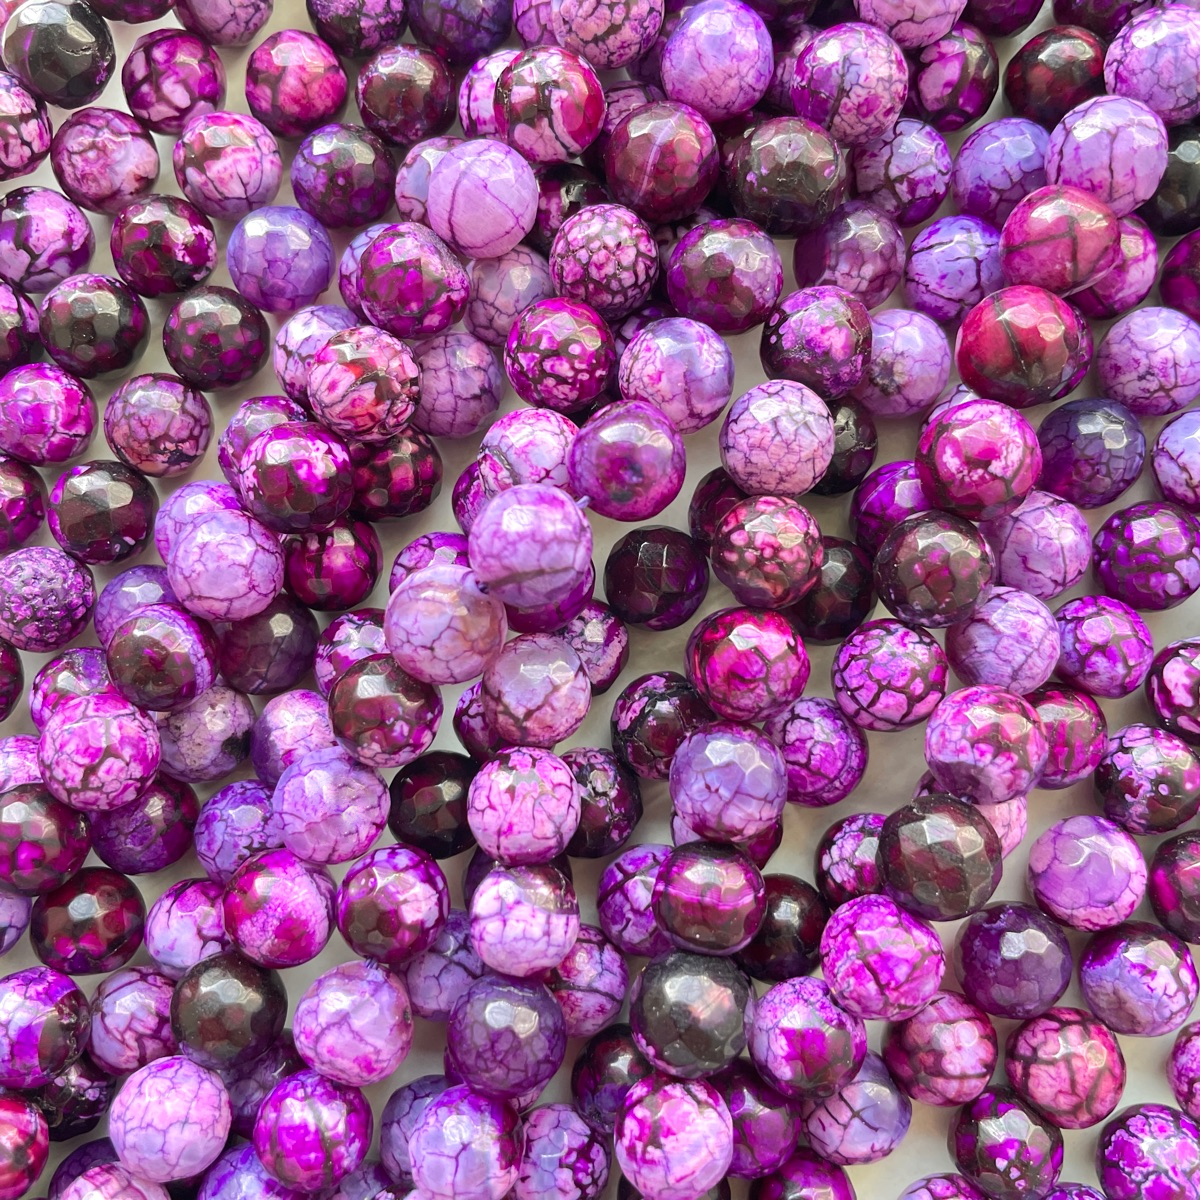 2 Strands/lot 10mm Colorful Cracked Fire Agate Faceted Stone Beads Purple Stone Beads Faceted Agate Beads New Beads Arrivals Charms Beads Beyond